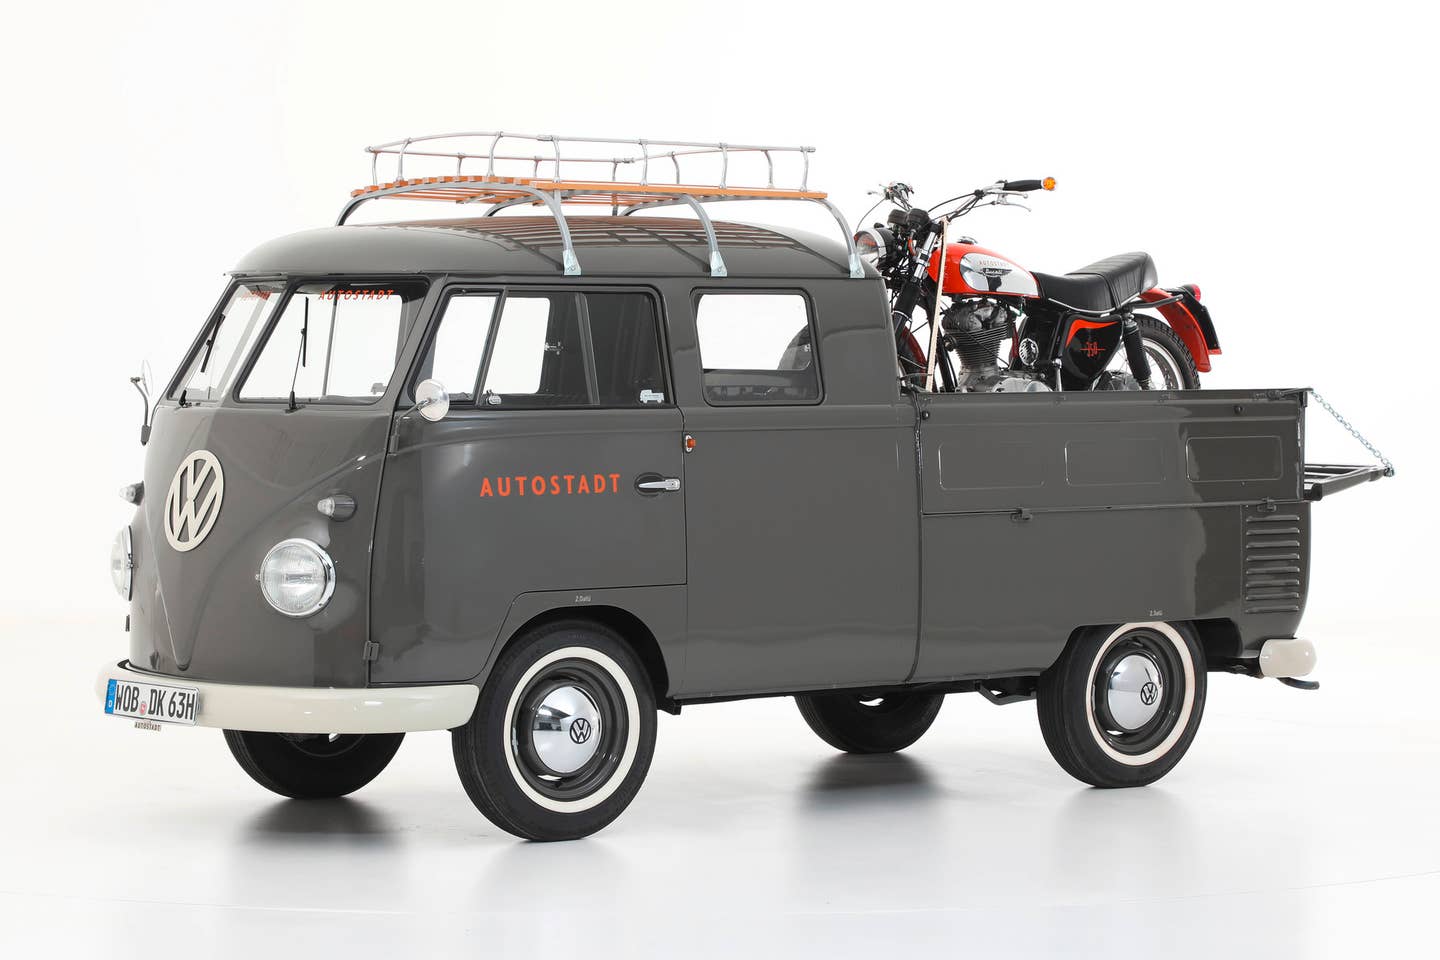 A Volkswagen Type 261 (1965) and Ducati Scrambler 350 (1973) of Autostadt’s historical car collection. The Type 2 VW Bus came in a variety of pickup configurations. Credit: VW